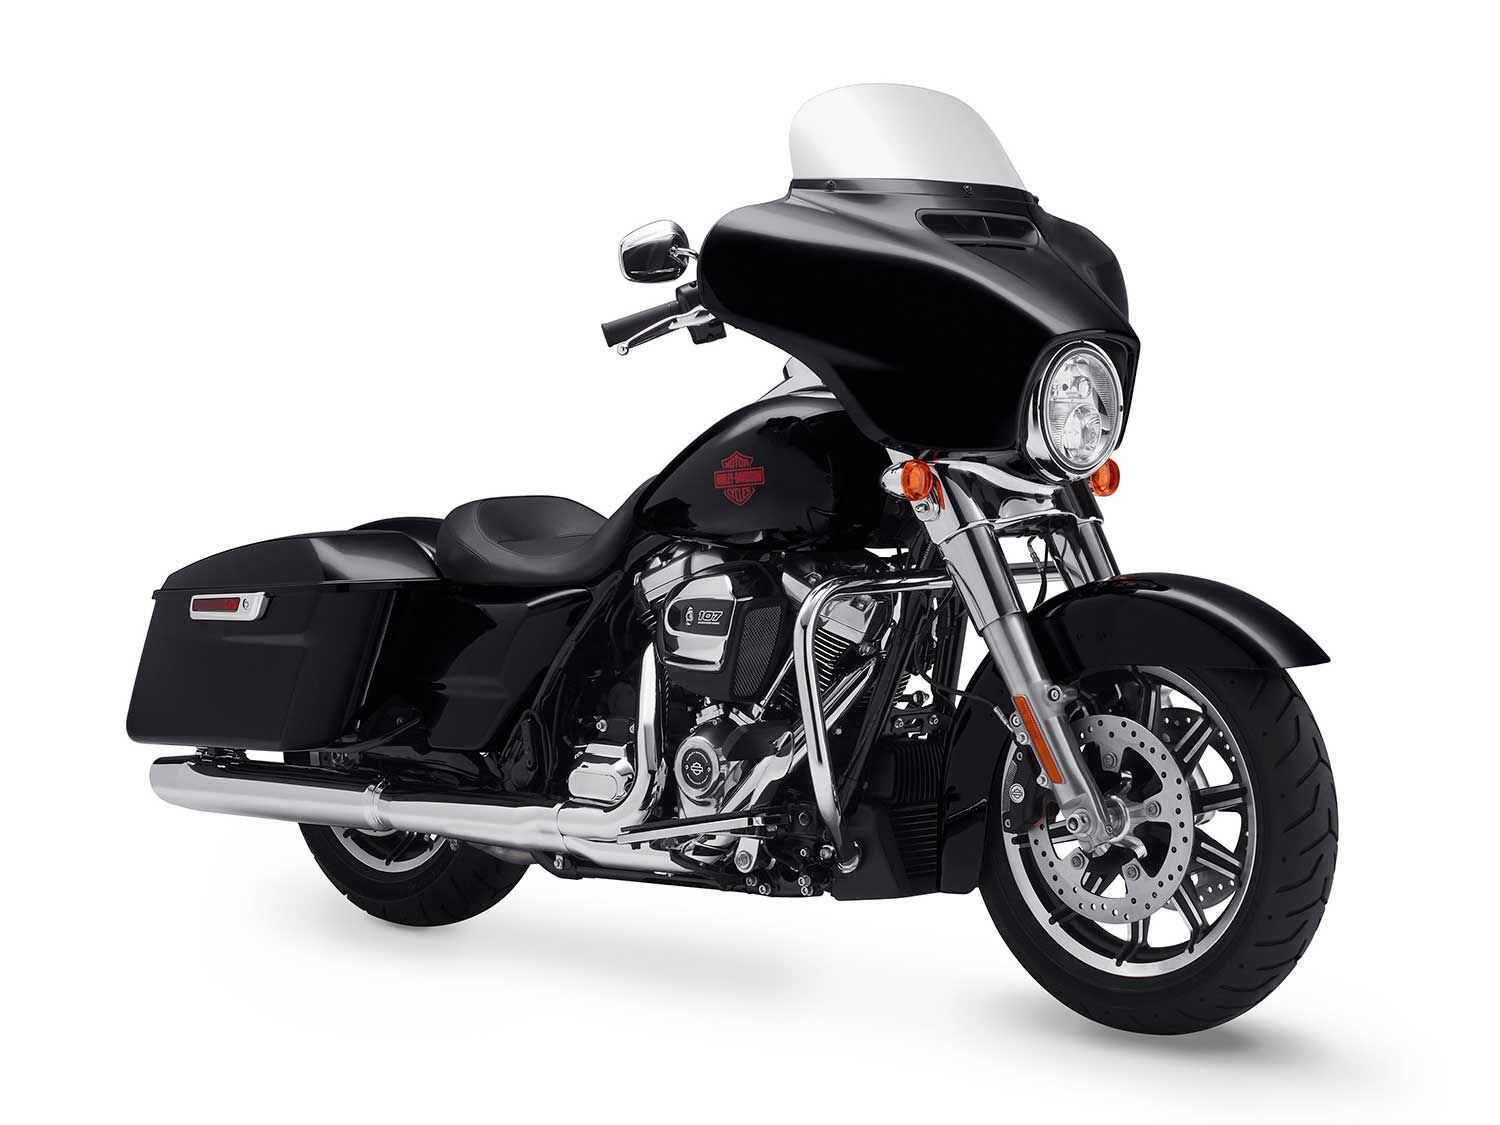 The new Harley Electra Glide Standard is a stripped-down Electra Glide Ultra Classic that aims to put the emphasis “on the ride experience.”